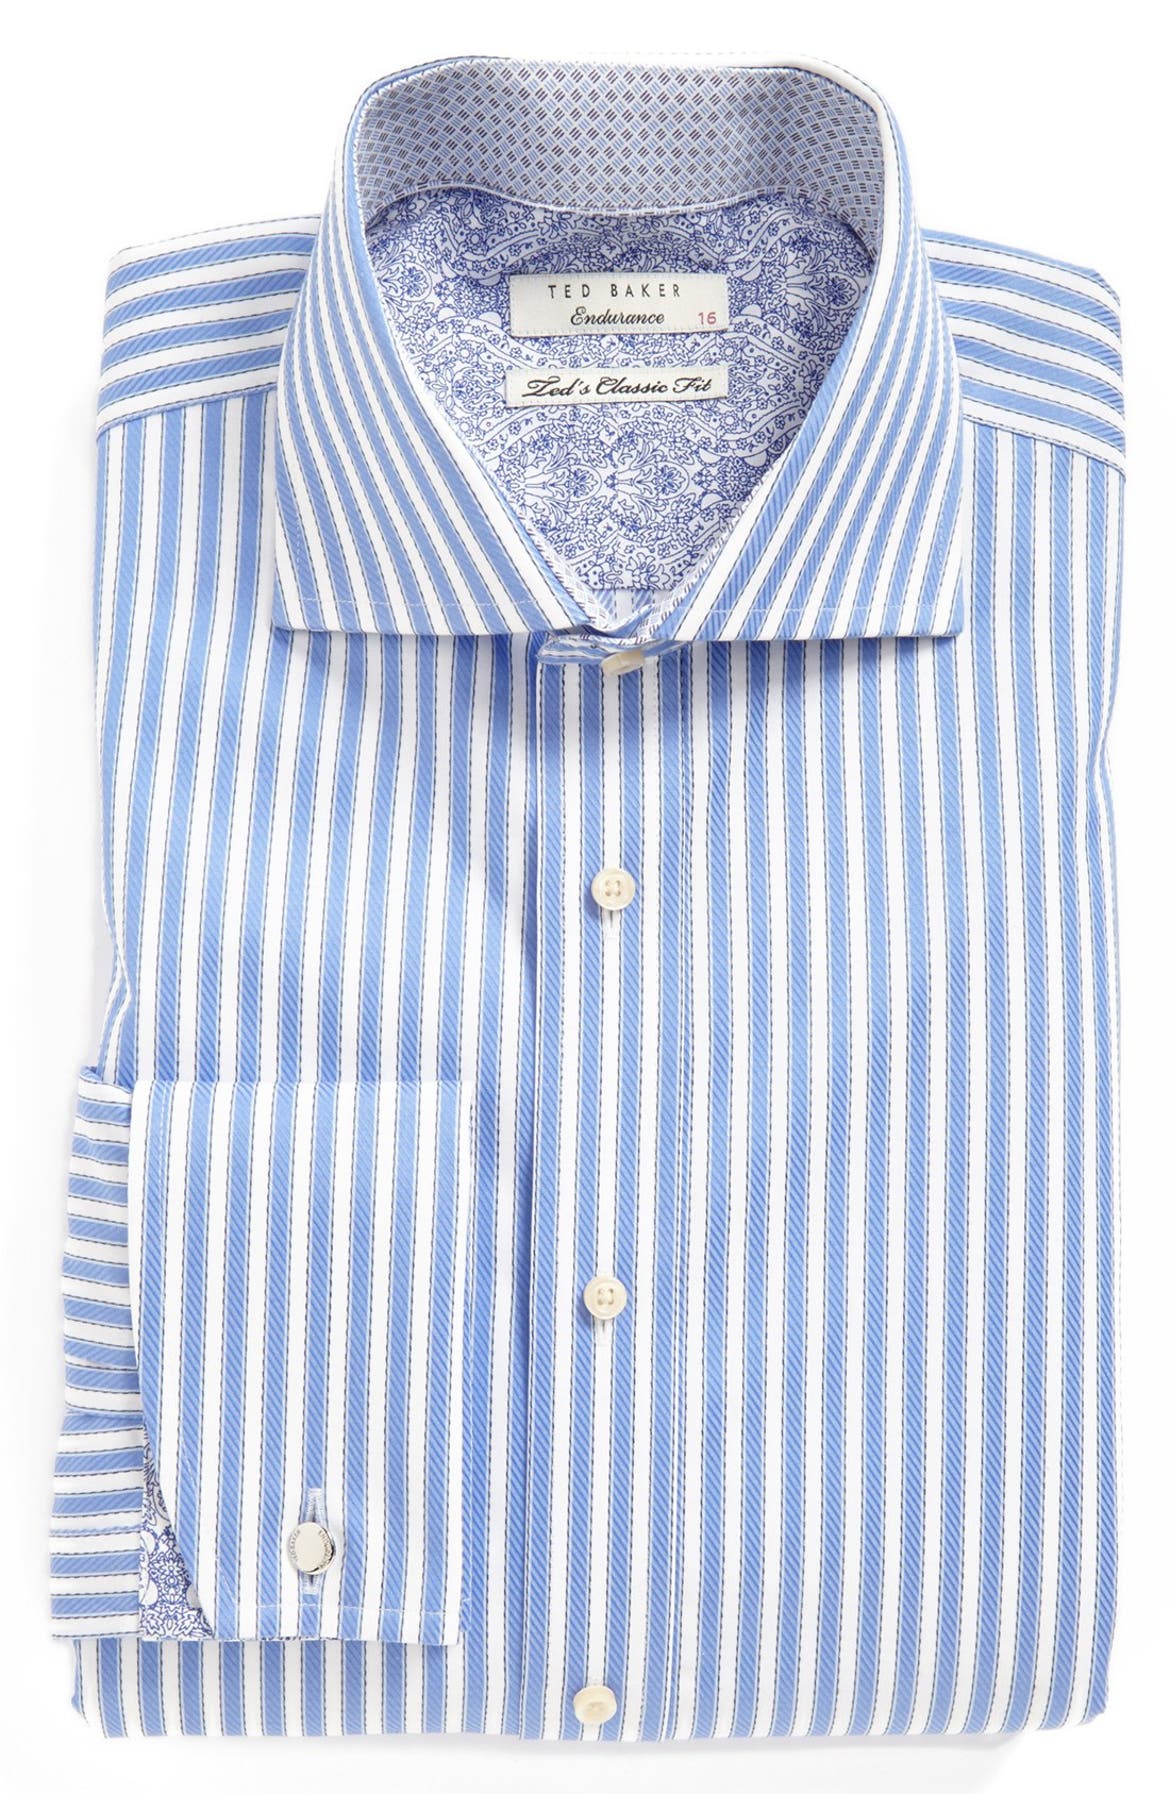 Ted Baker London Classic Fit Dress Shirt | Nordstrom